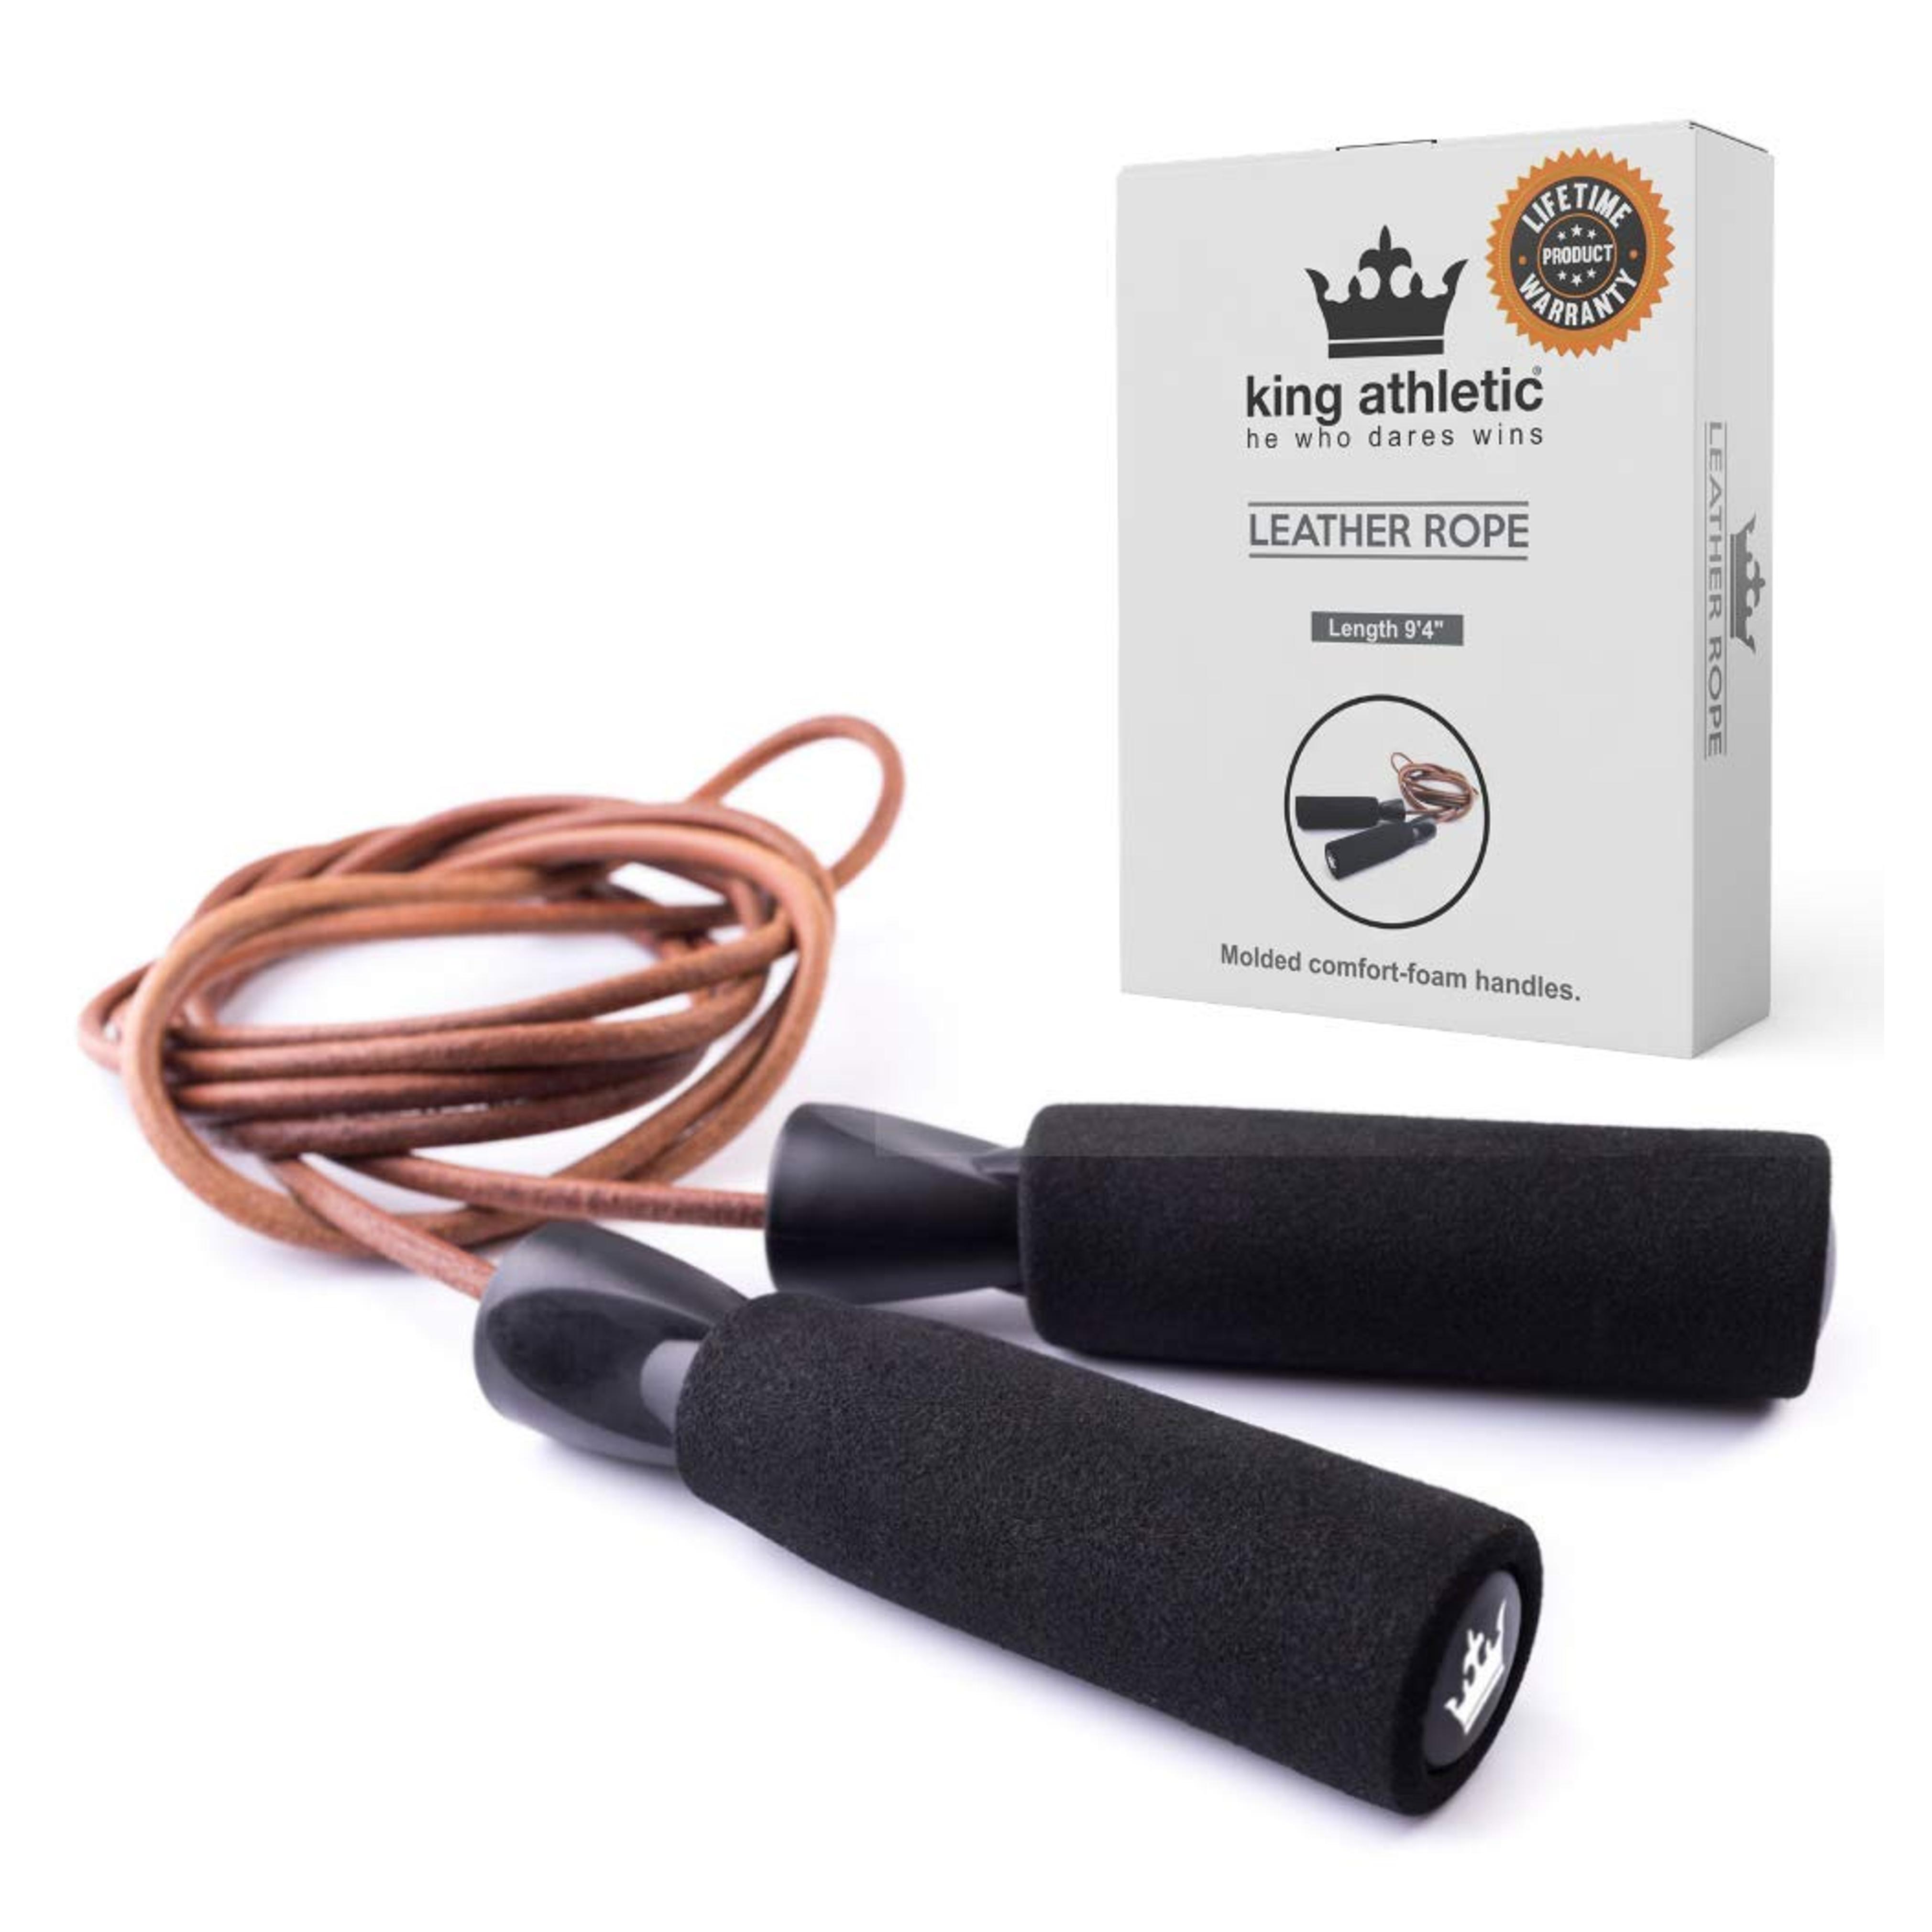 Voted #1 Leather Jump Rope for Fitness Training - $1 From Every Purchase is Donated to Prostate and Breast Cancer Research - Premium Quality - Great Boxing and CrossFit Speed Workout - Best Exercise for Heart Health - The King Athletic Leather Jumping Rop